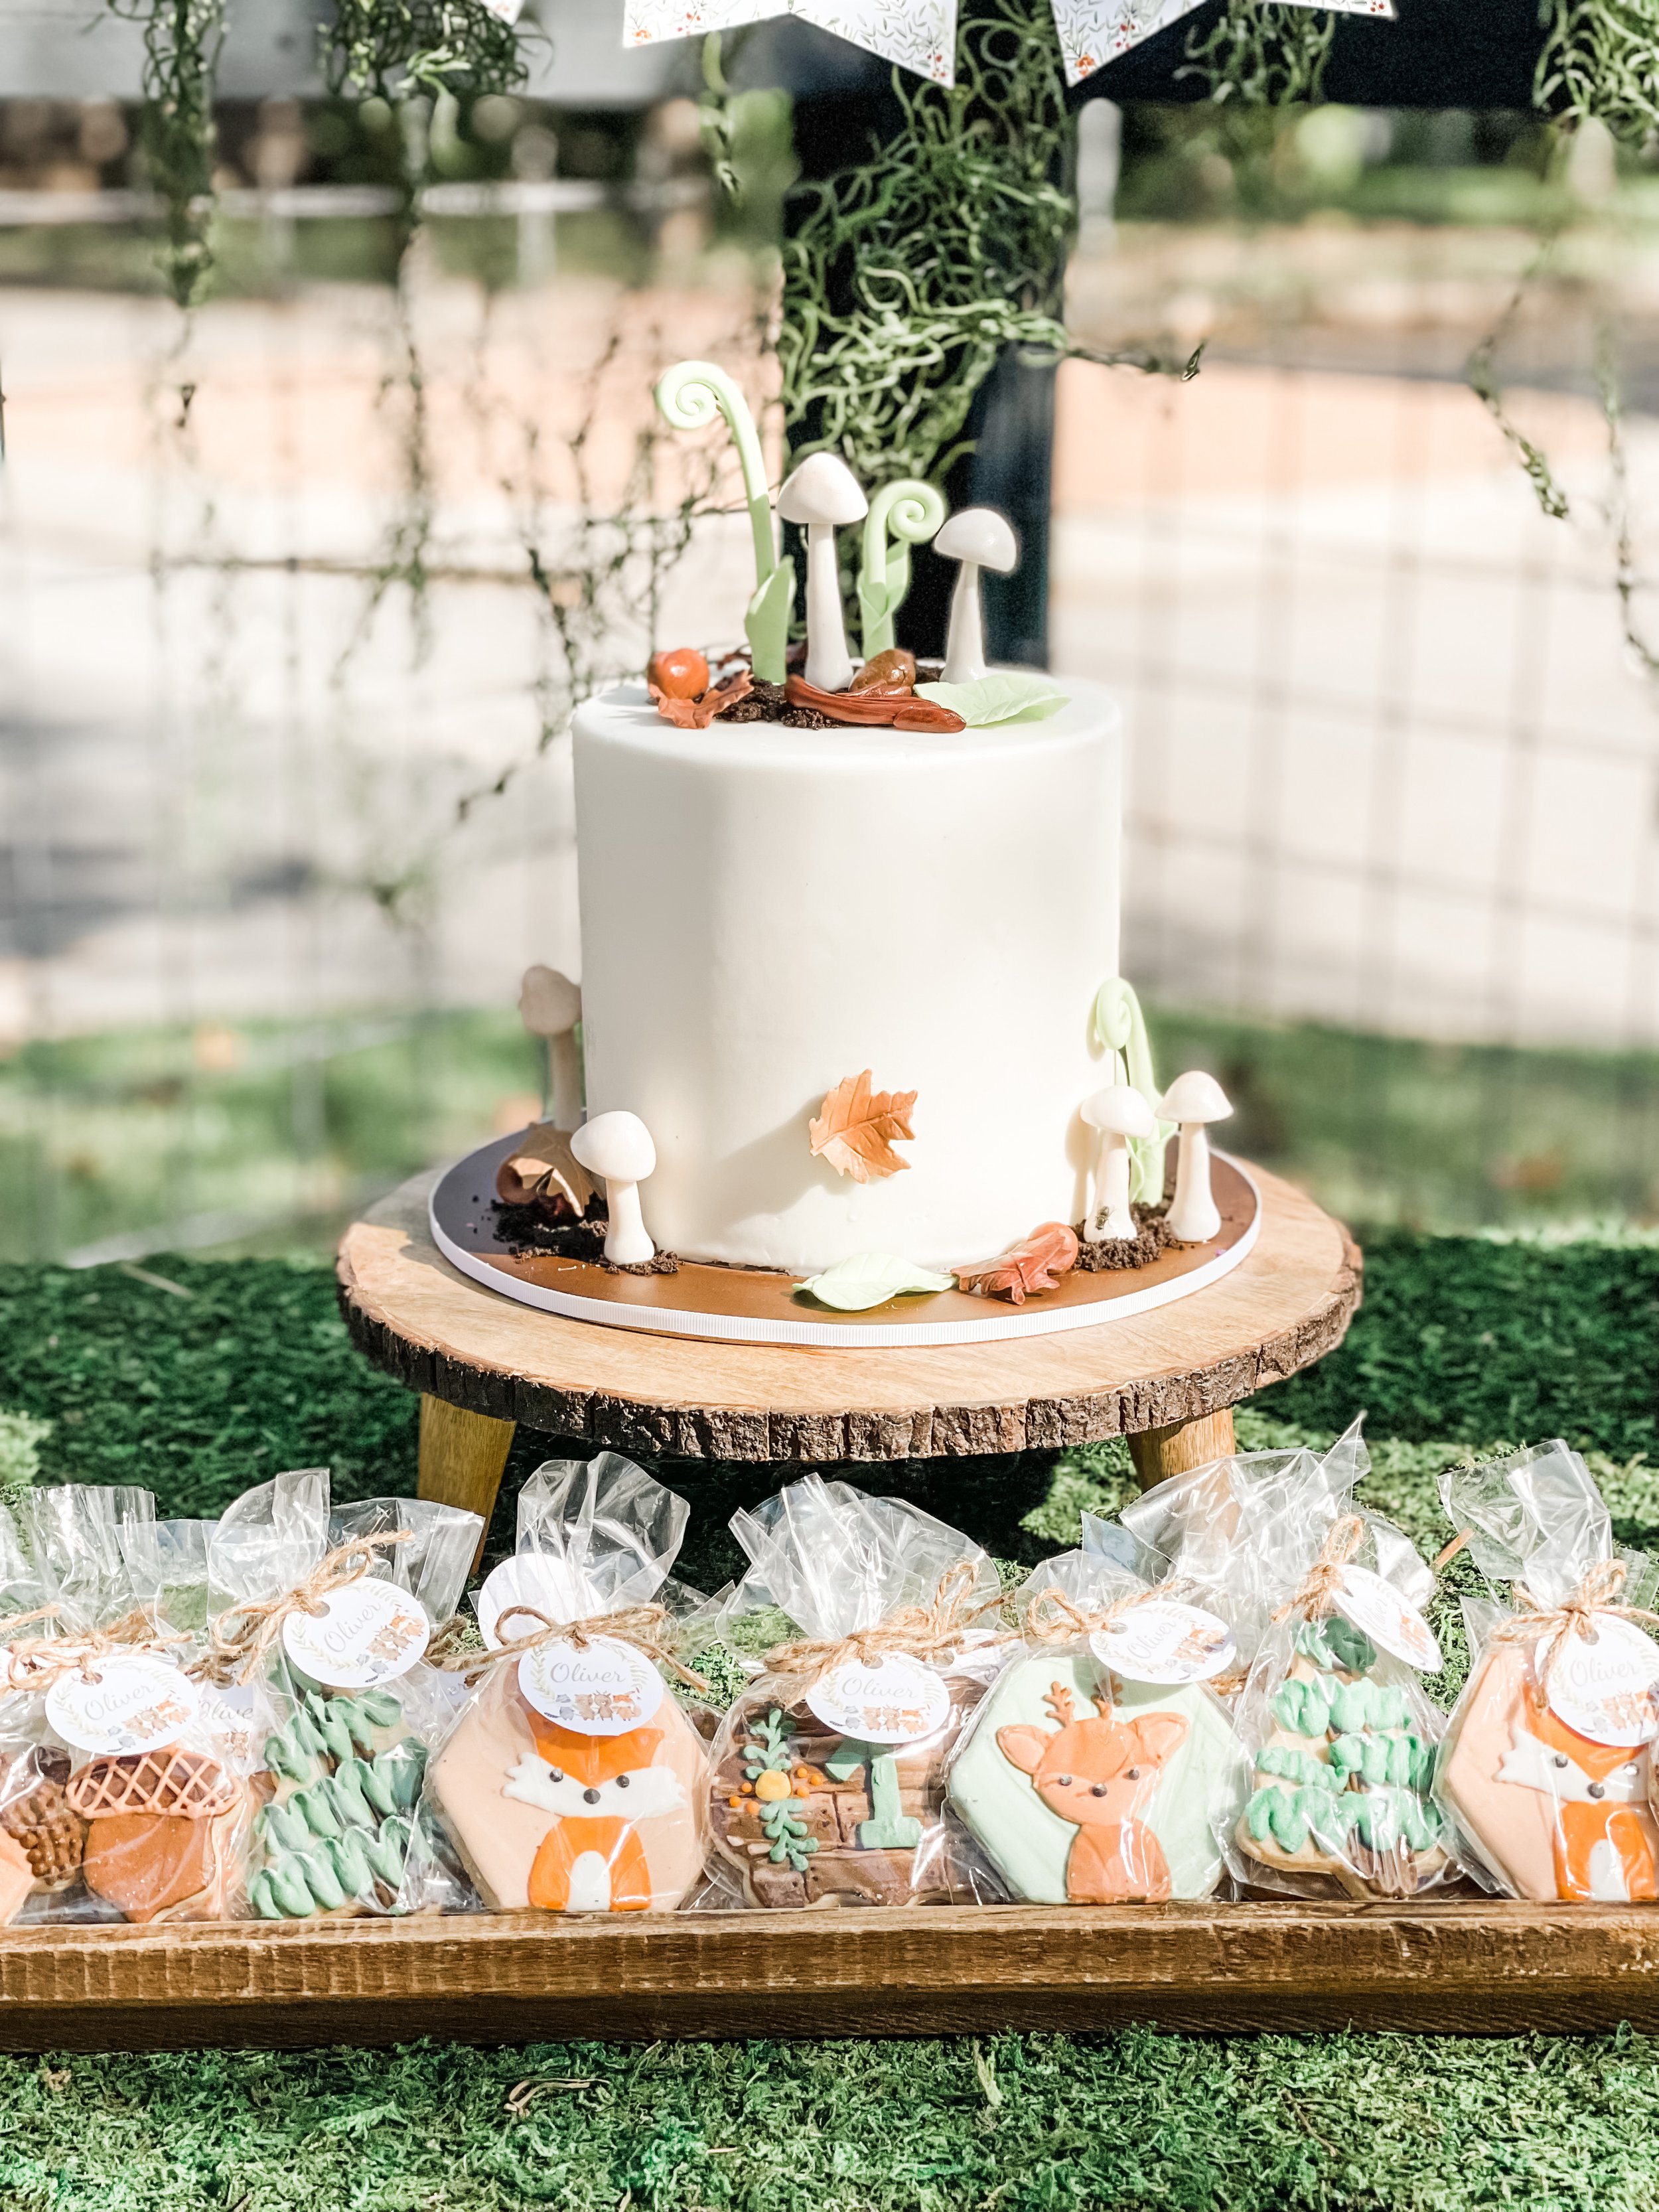  Woodland-themed first birthday cake with white frosting and fondant mushroom, plant, and leaf decorations on a wood slice pedestal stand, with woodland-themed iced cookie favors in individual plastic bags 